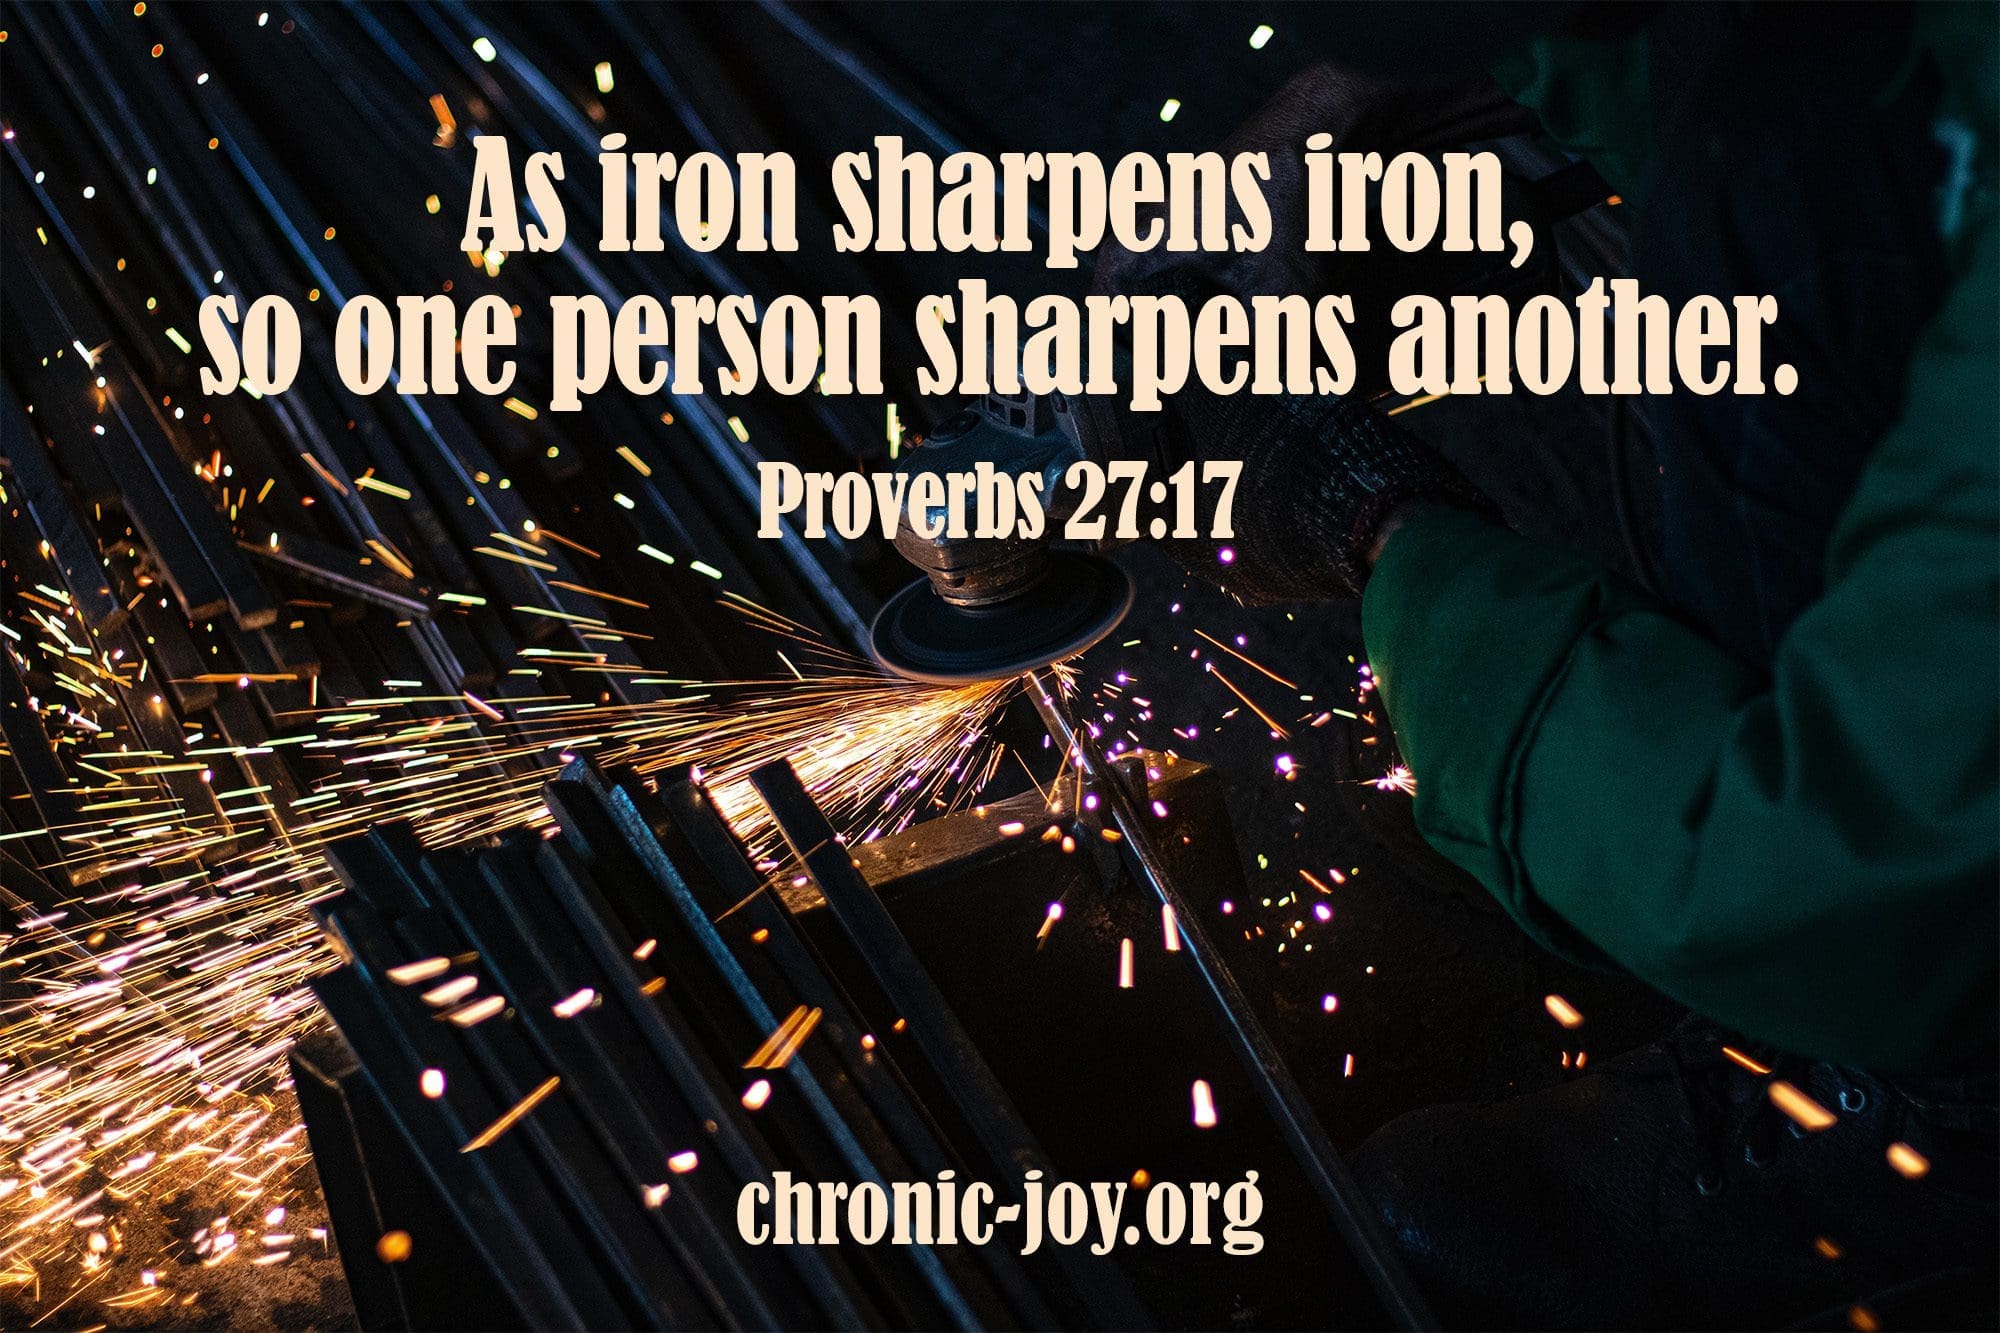 "As iron sharpens iron, so one person sharpens another." Proverbs 27:17